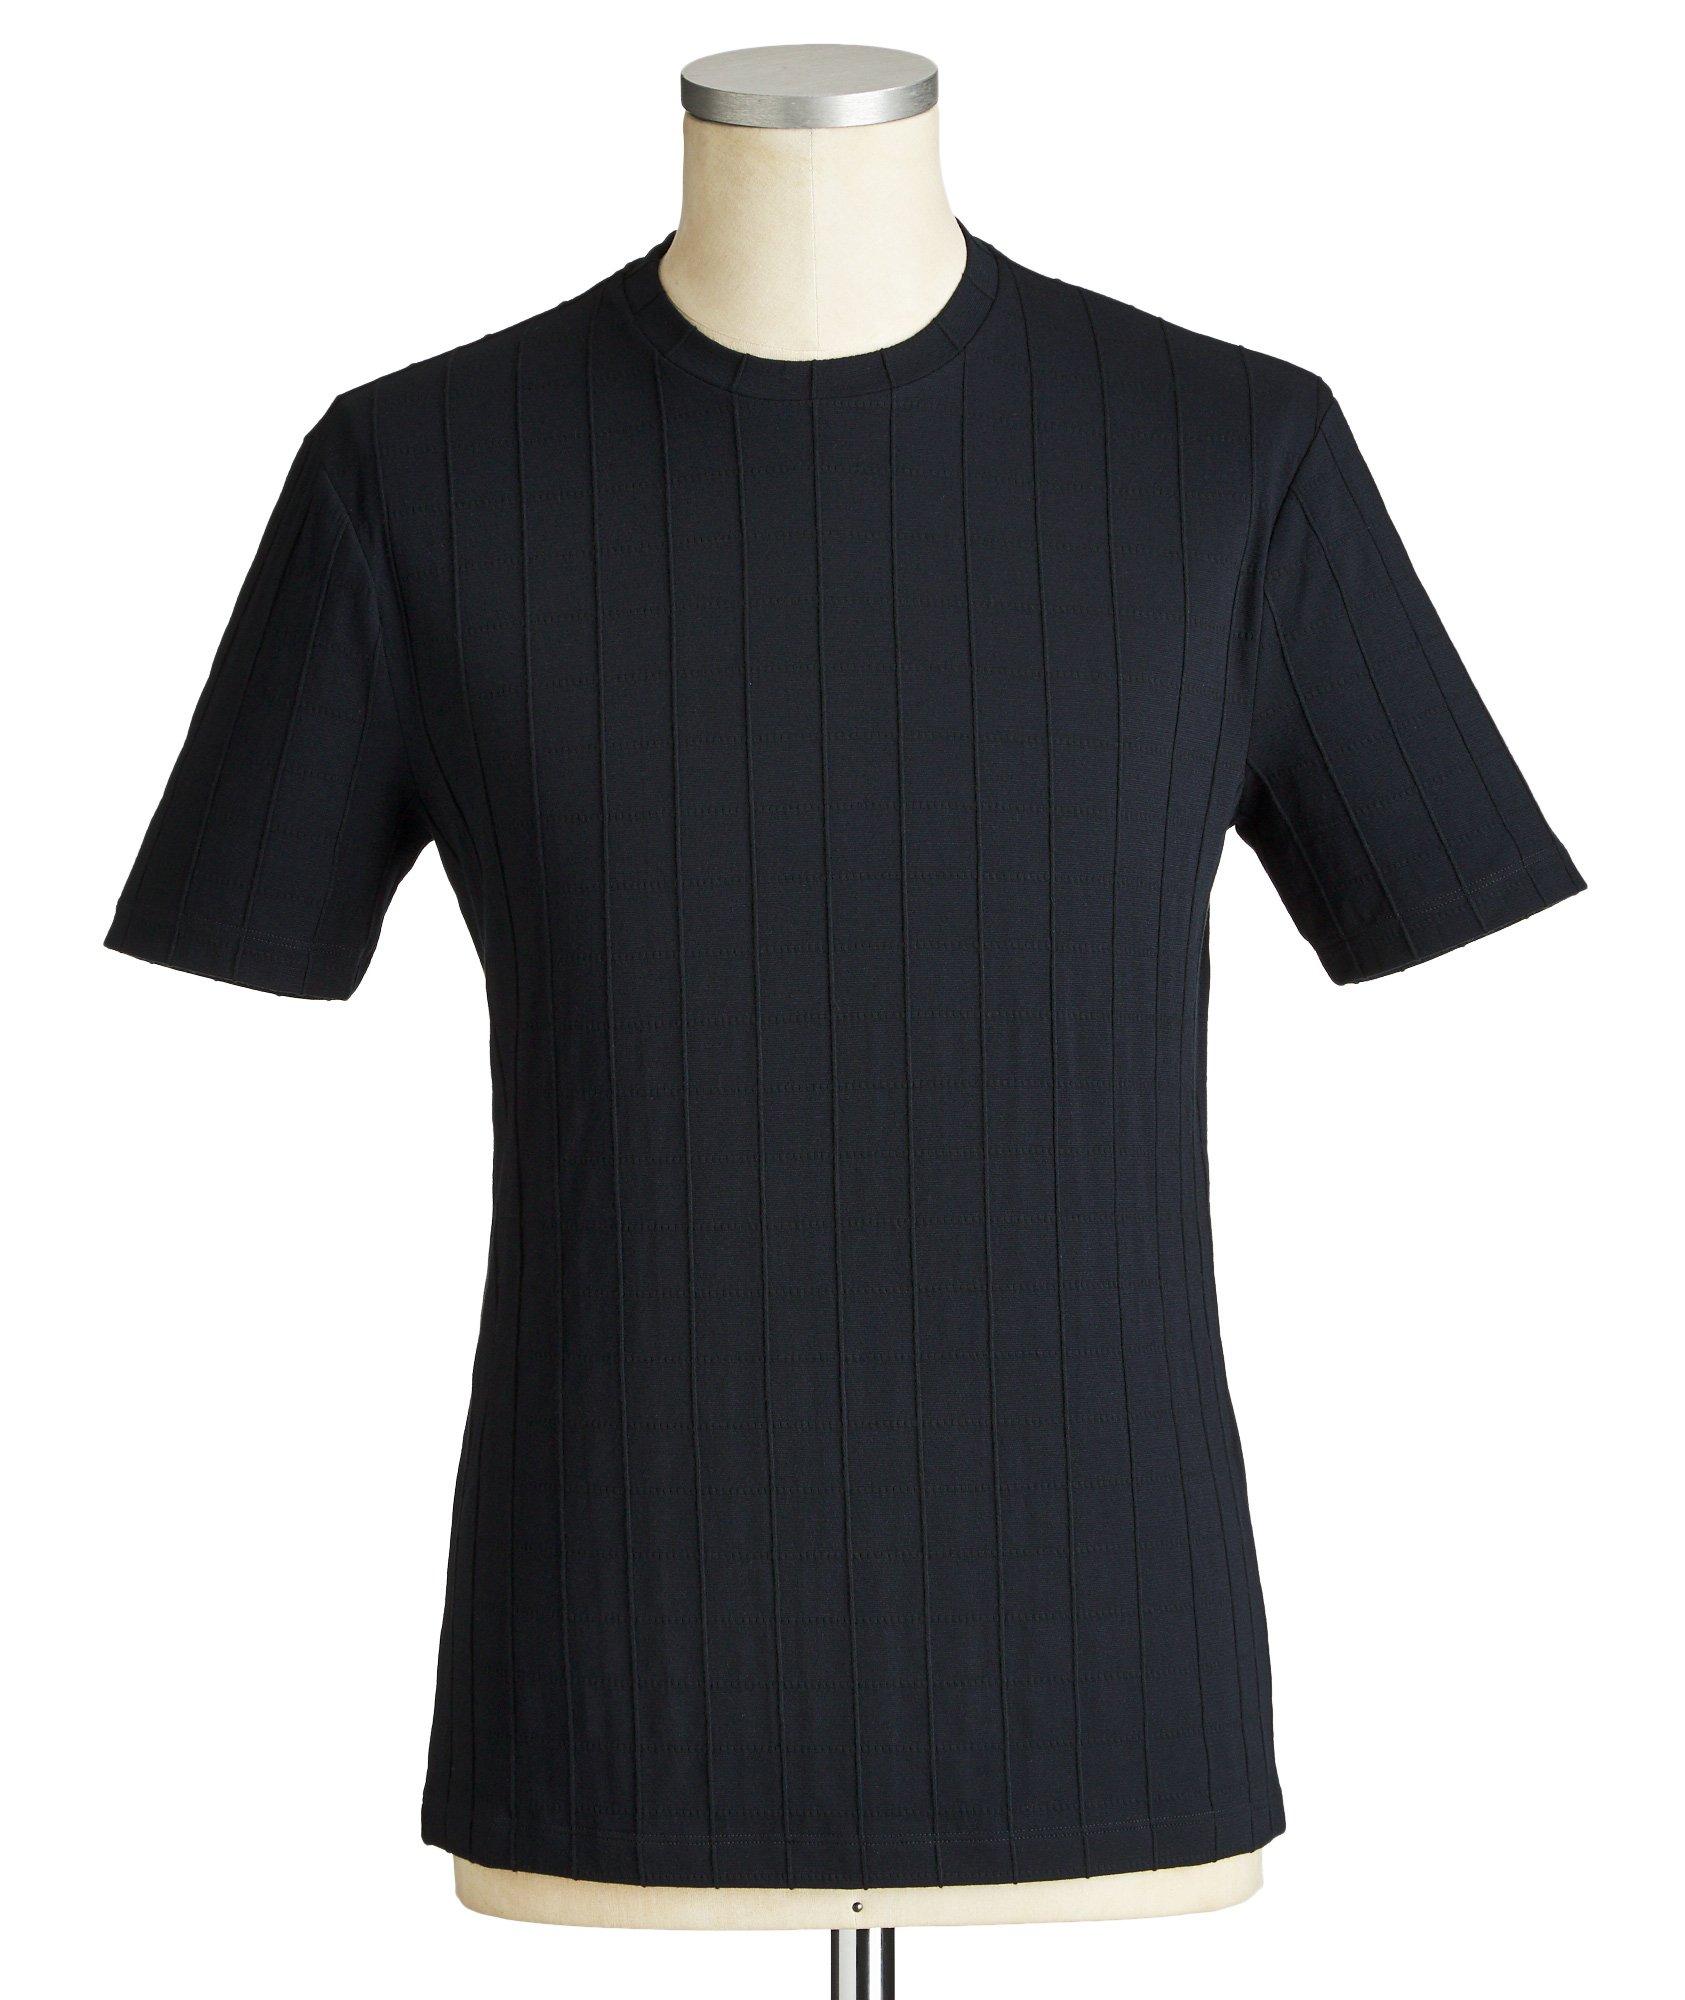 Textured Stretch-Cashmere T-Shirt image 0